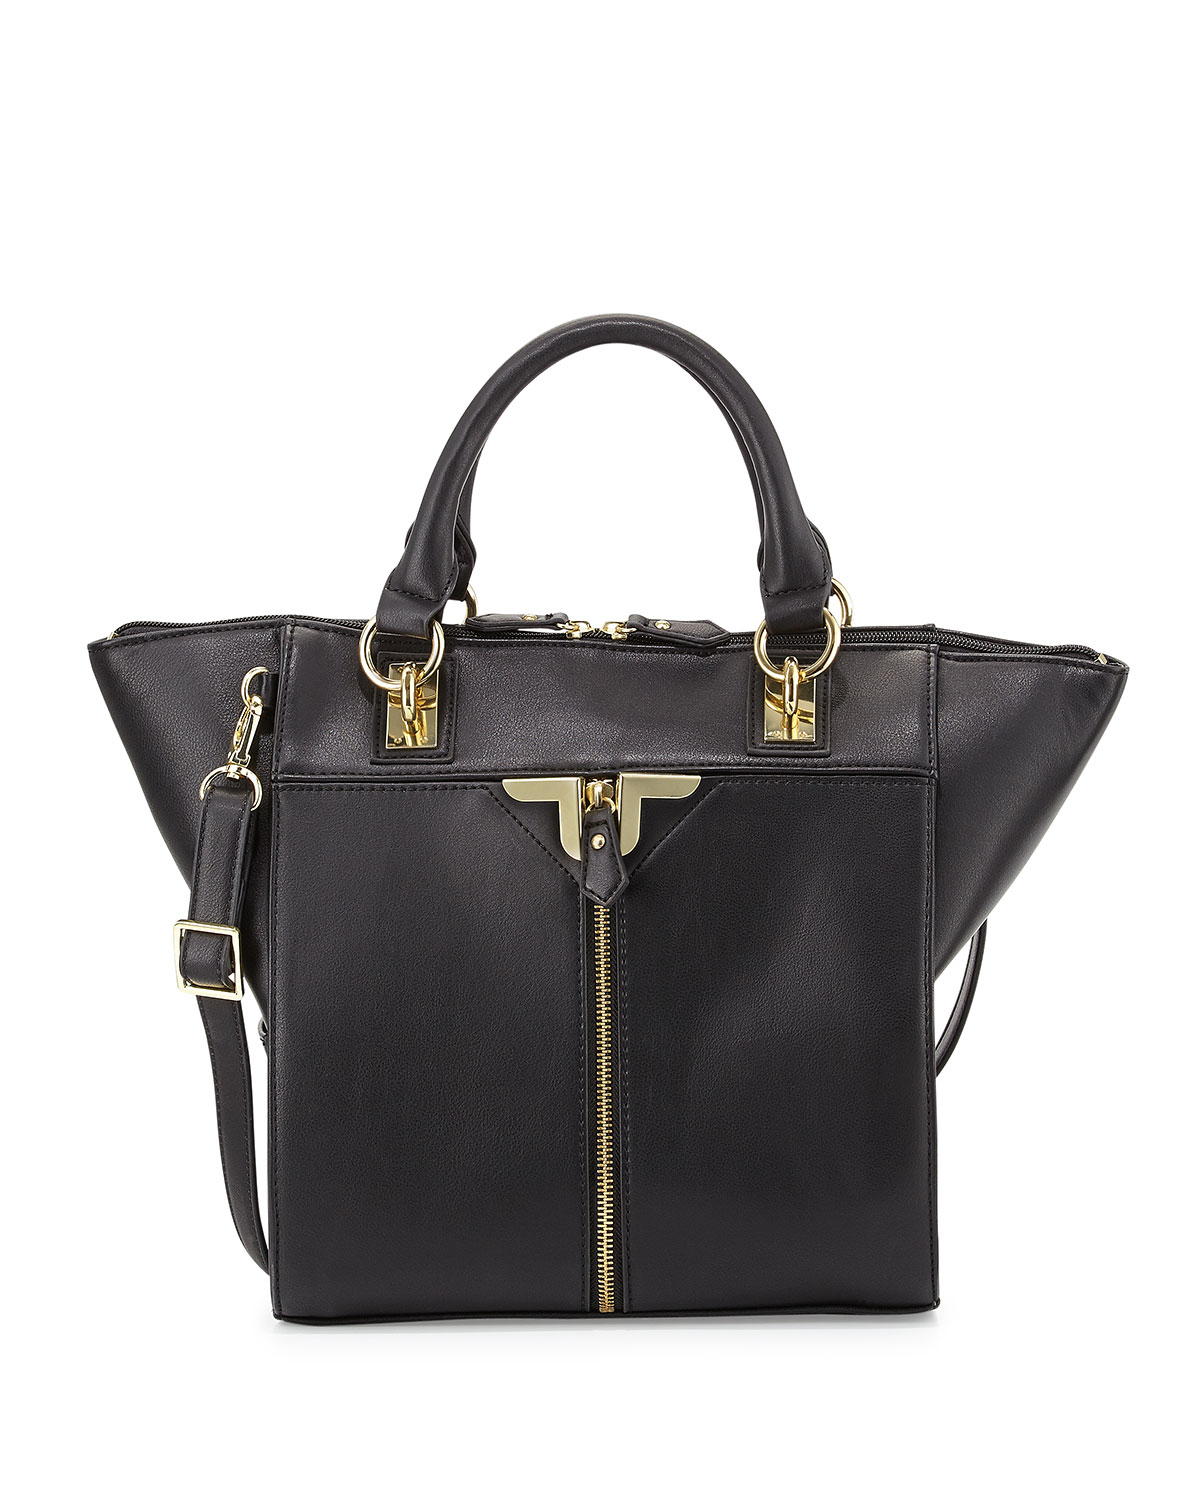 Danielle nicole Faux-Leather Zip-Front Tote Bag in Black | Lyst